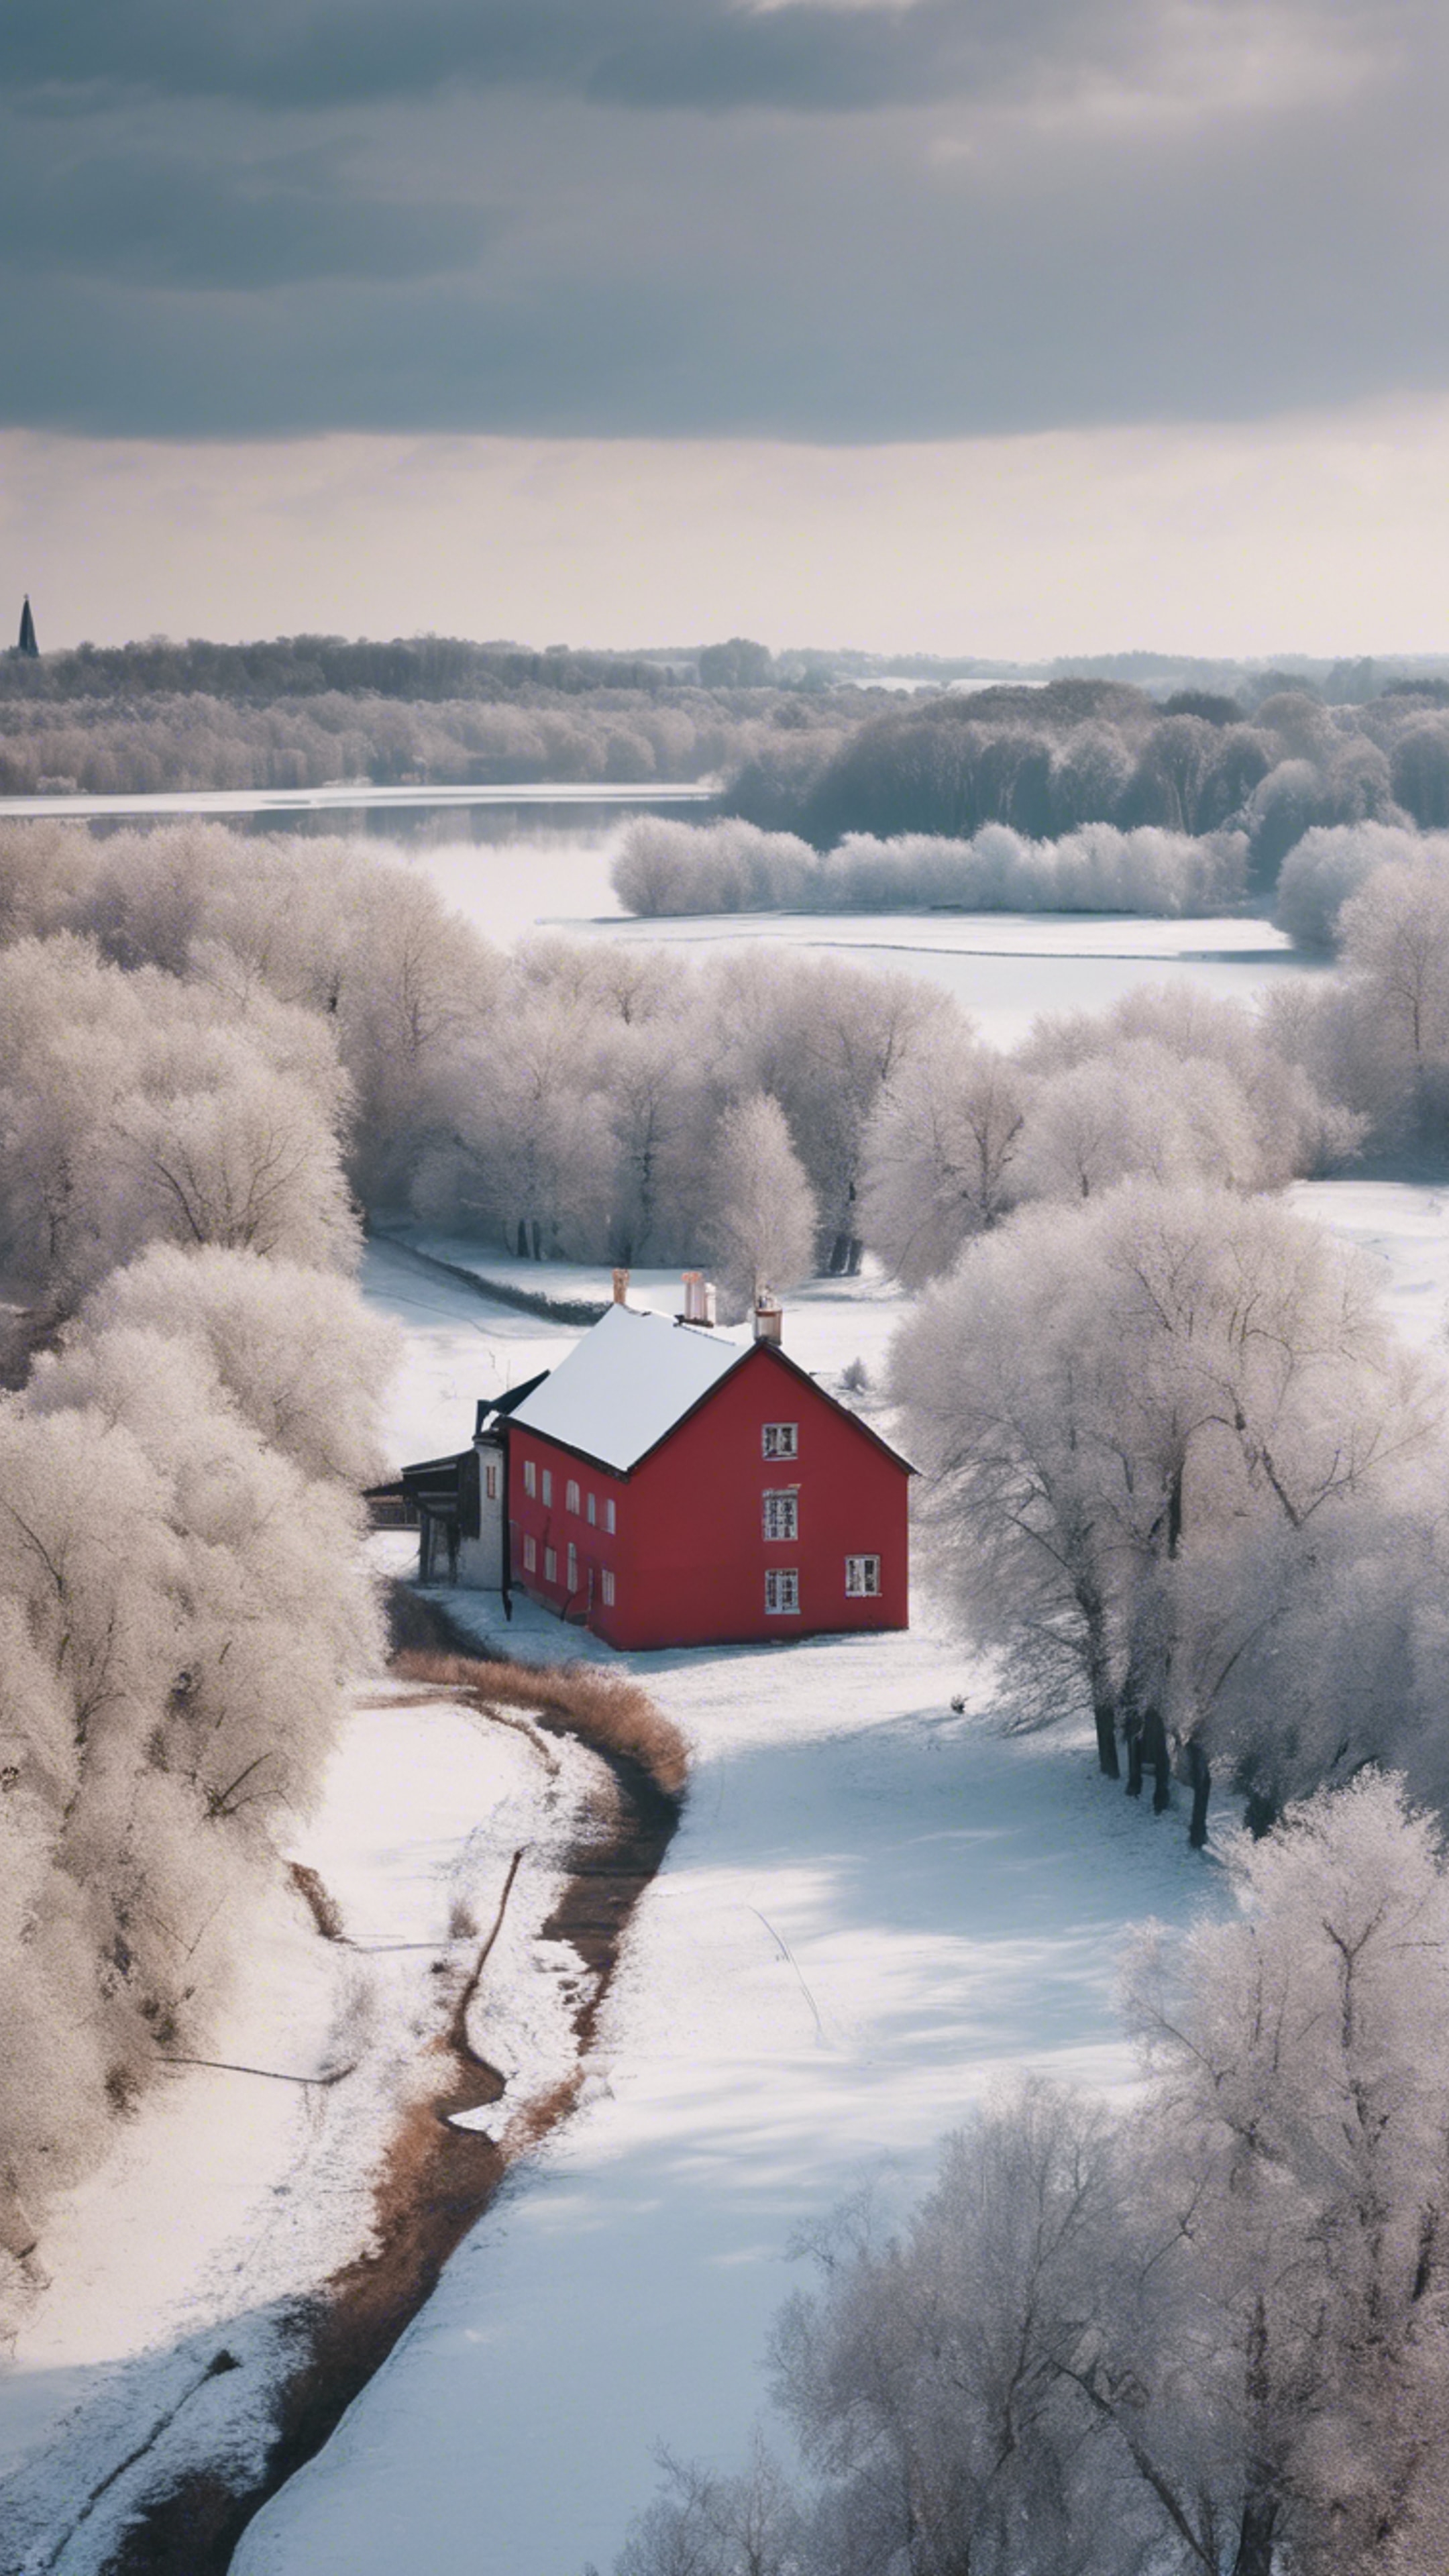 A snow-covered French country landscape with bare trees, a frozen river, and a small red-roofed house in the distance. Тапет[86a496d4055745a5962e]